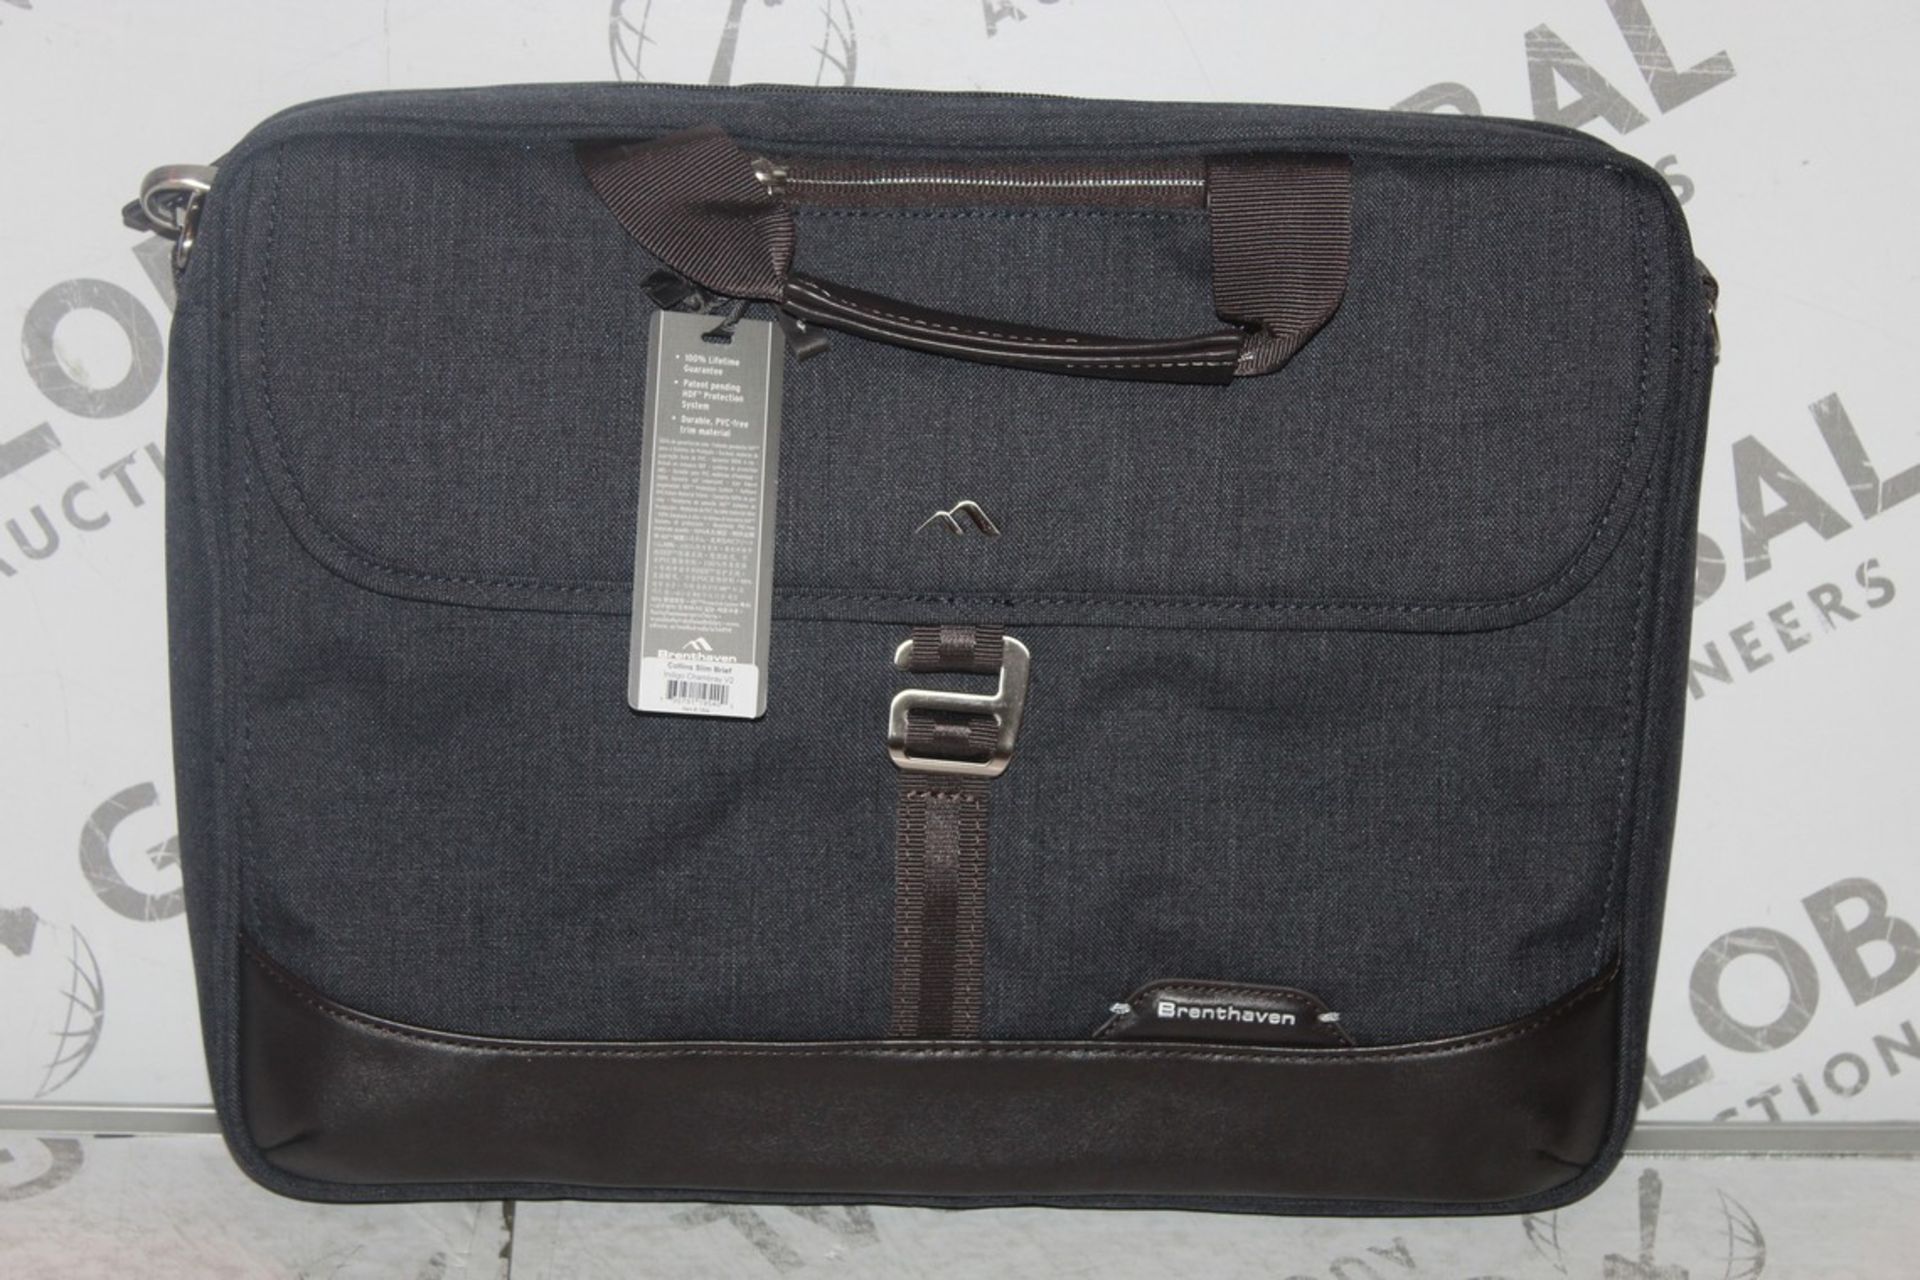 Brenthaven Collins Collection Briefcase RRP £50